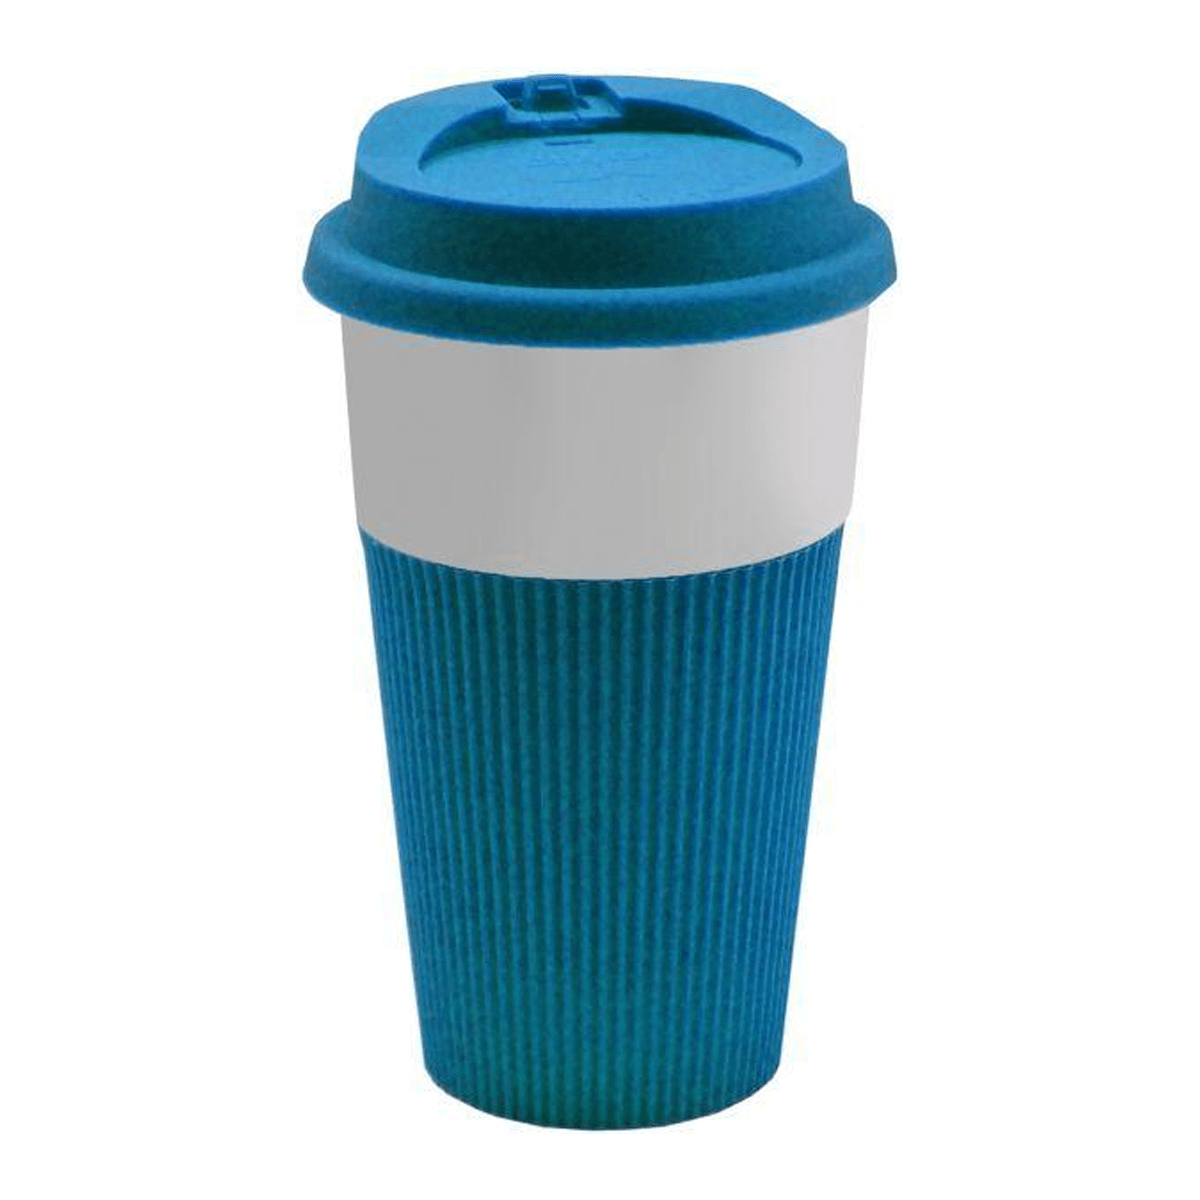 IN STOCK, Green Pink Ribbed Ceramic Travel Mug With Silicone Lid